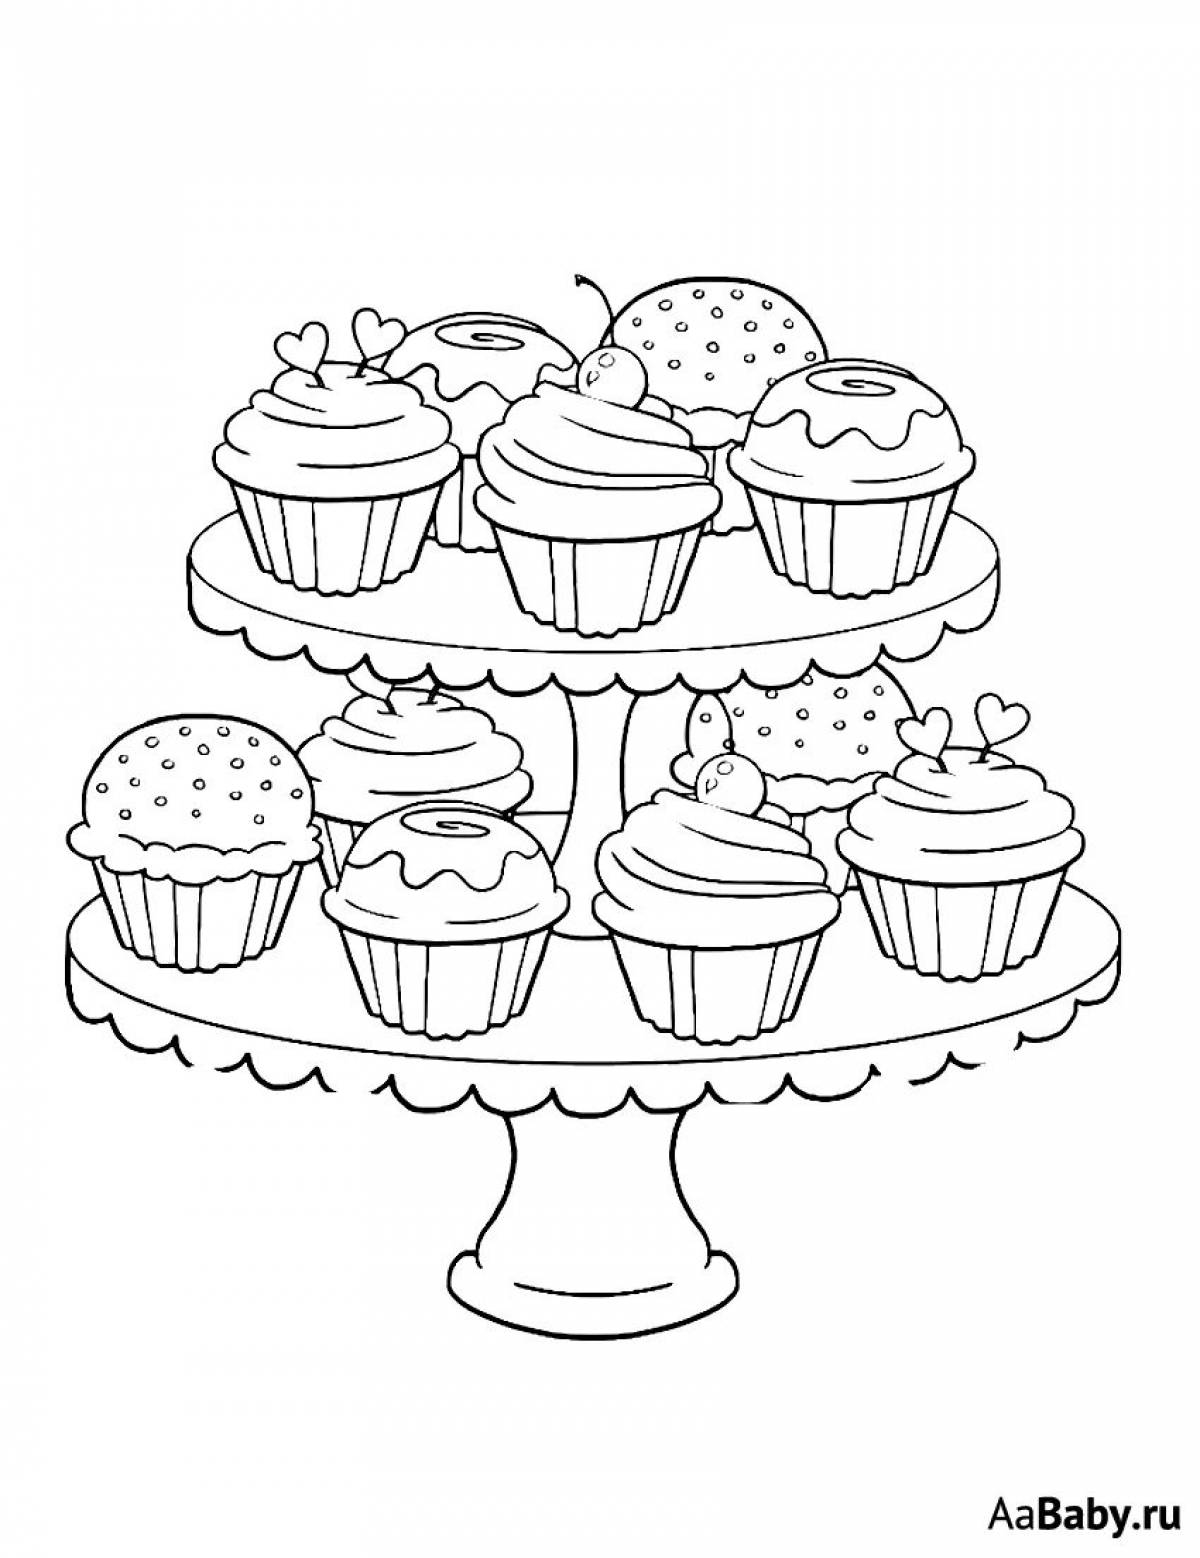 Rich pastry coloring page